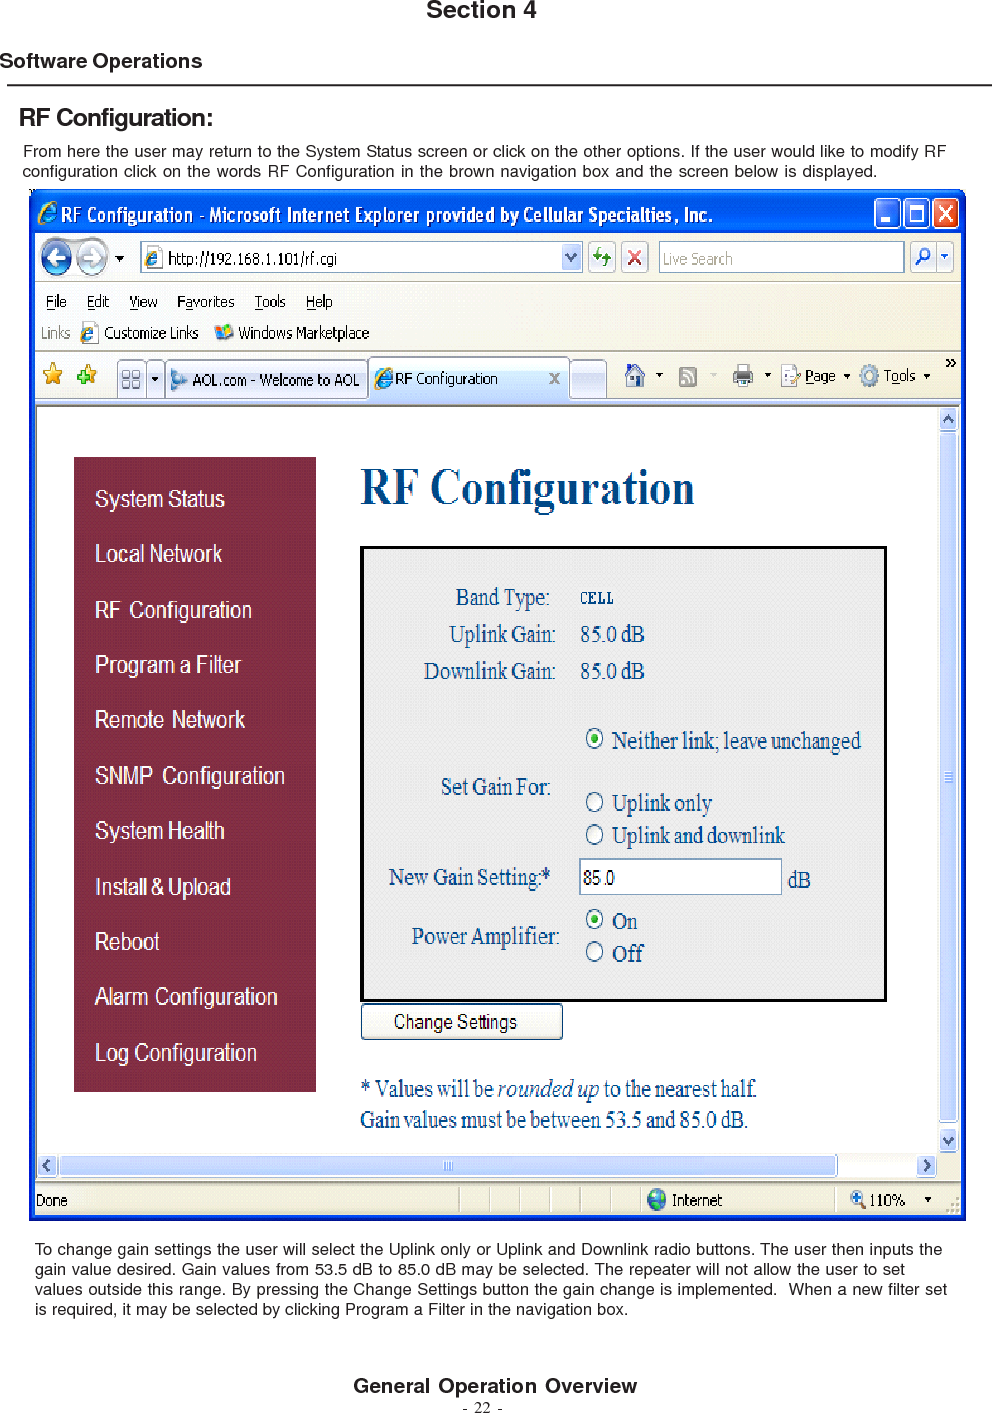 - 22 -Software OperationsSection 4From here the user may return to the System Status screen or click on the other options. If the user would like to modify RFconfiguration click on the words RF Configuration in the brown navigation box and the screen below is displayed.RF Configuration:To change gain settings the user will select the Uplink only or Uplink and Downlink radio buttons. The user then inputs thegain value desired. Gain values from 53.5 dB to 85.0 dB may be selected. The repeater will not allow the user to setvalues outside this range. By pressing the Change Settings button the gain change is implemented.  When a new filter setis required, it may be selected by clicking Program a Filter in the navigation box.General Operation Overview